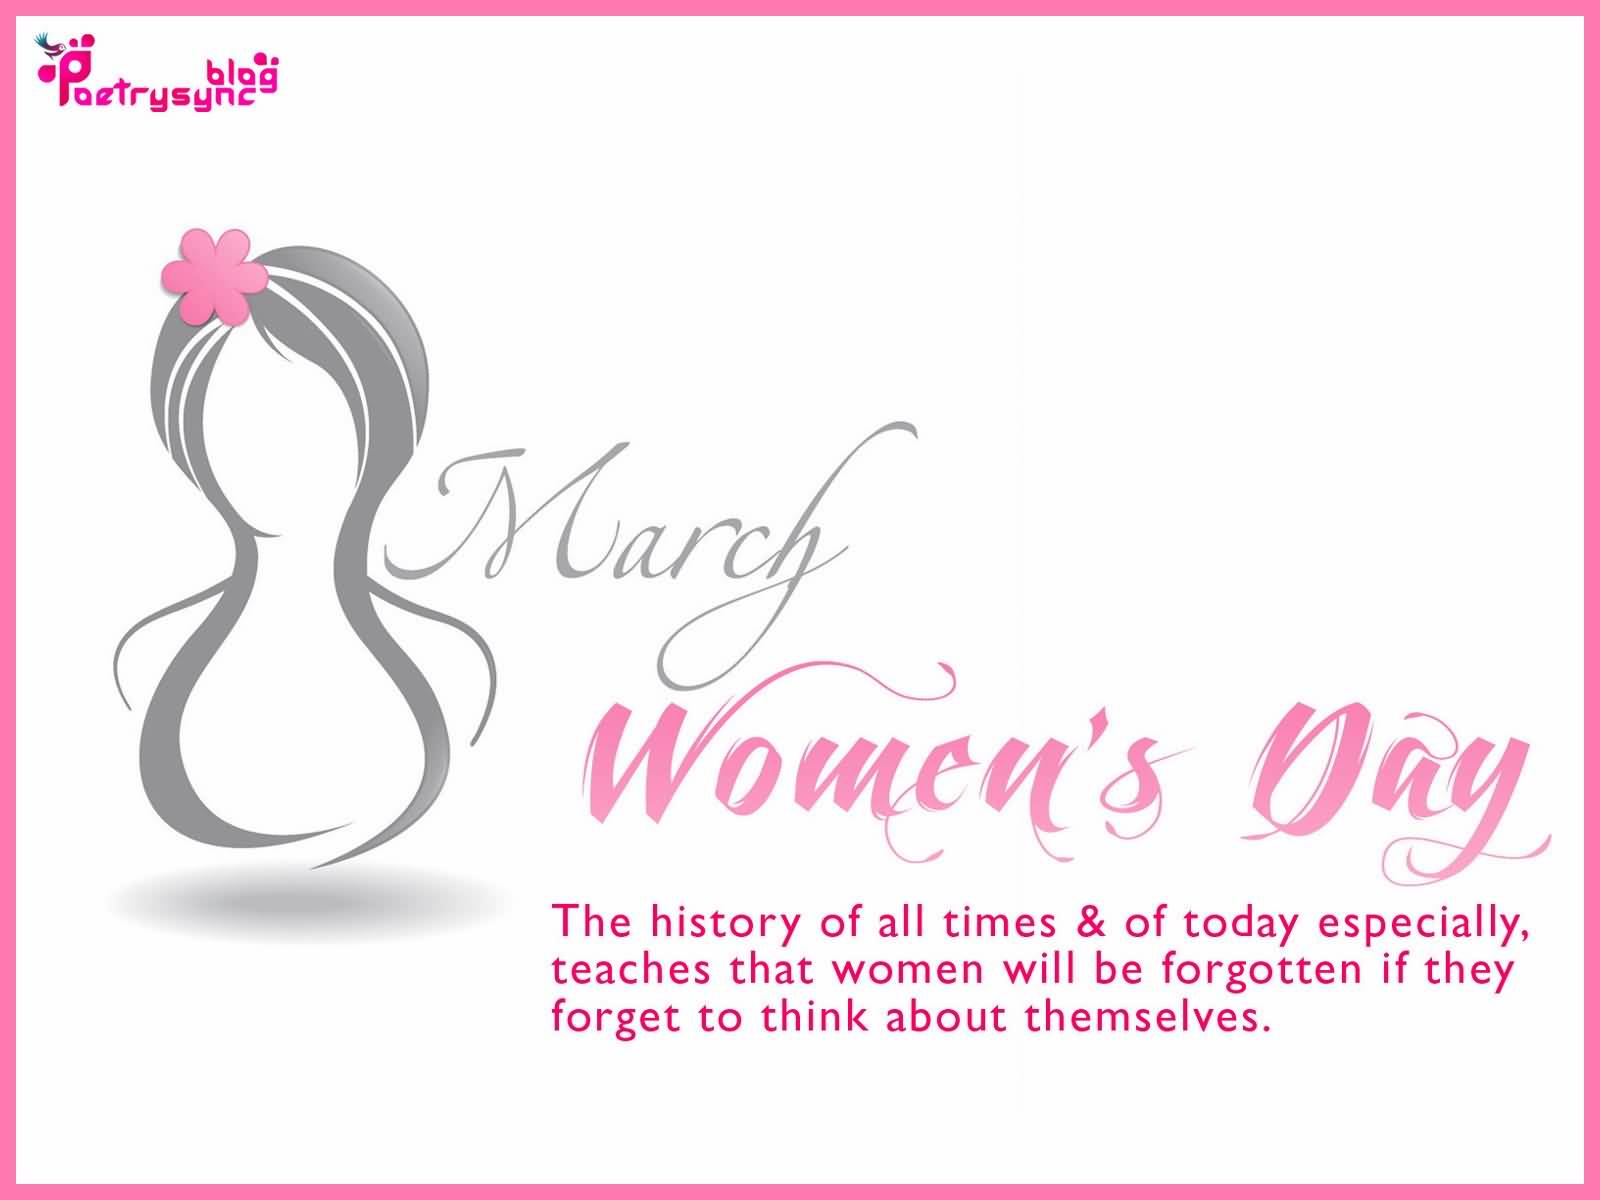 8 March Women’s Day The History Of All Times & Of Today Especially, Teaches That Women Will Be Forgotten If They Forget To Think About Themselves.